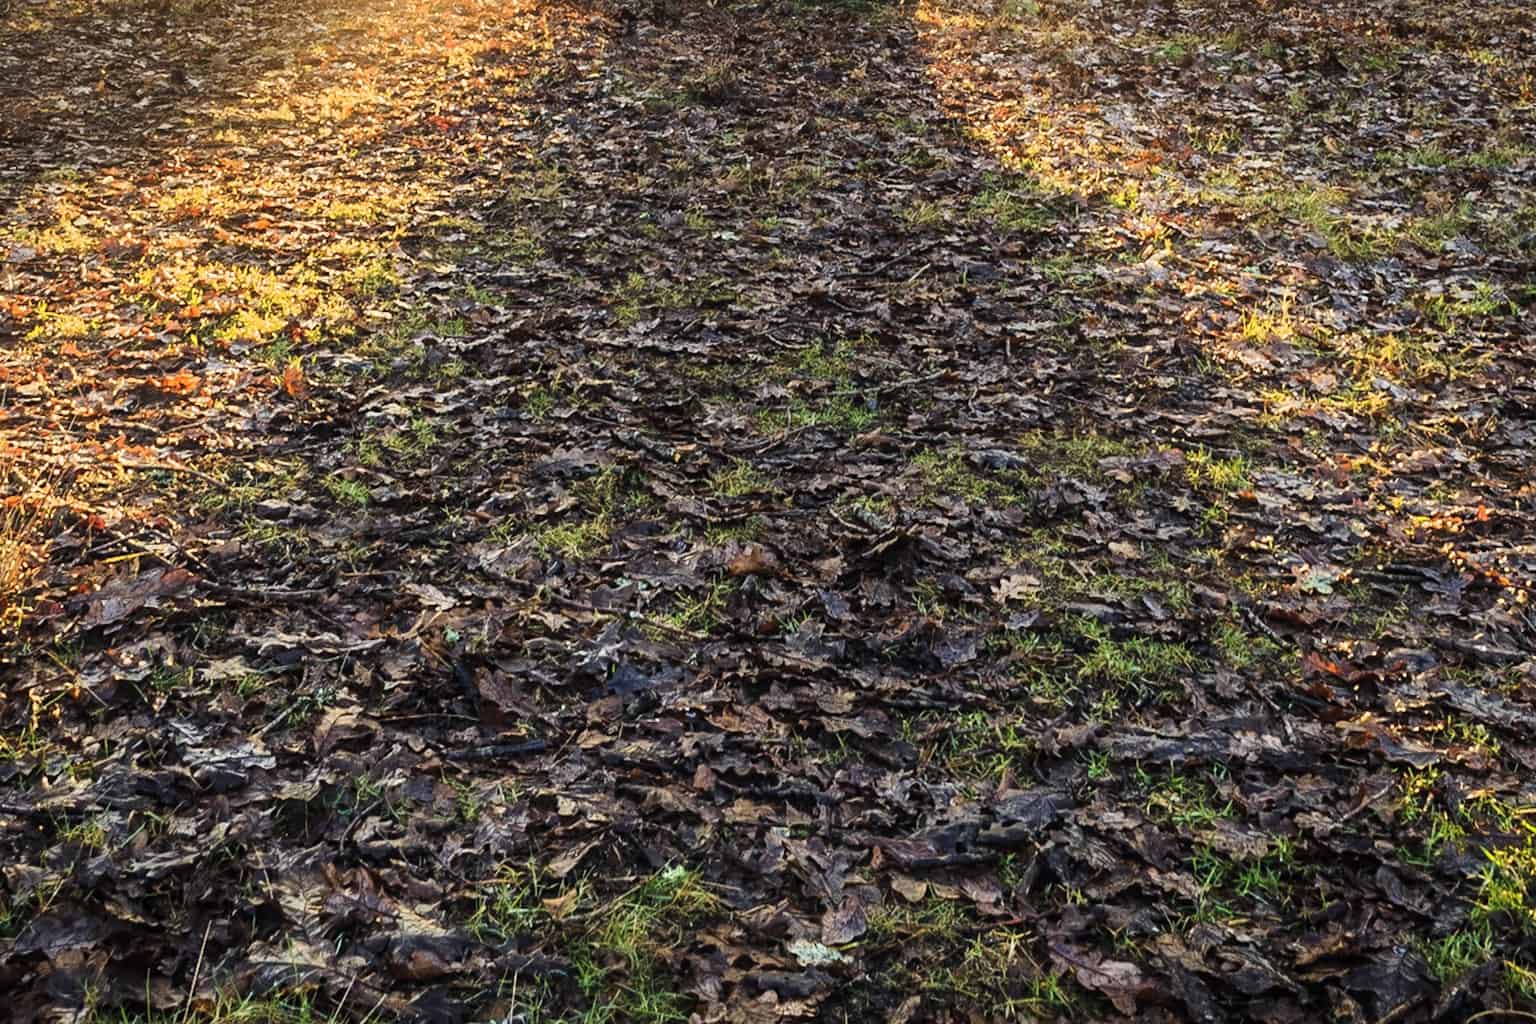  Leaves on the ground 